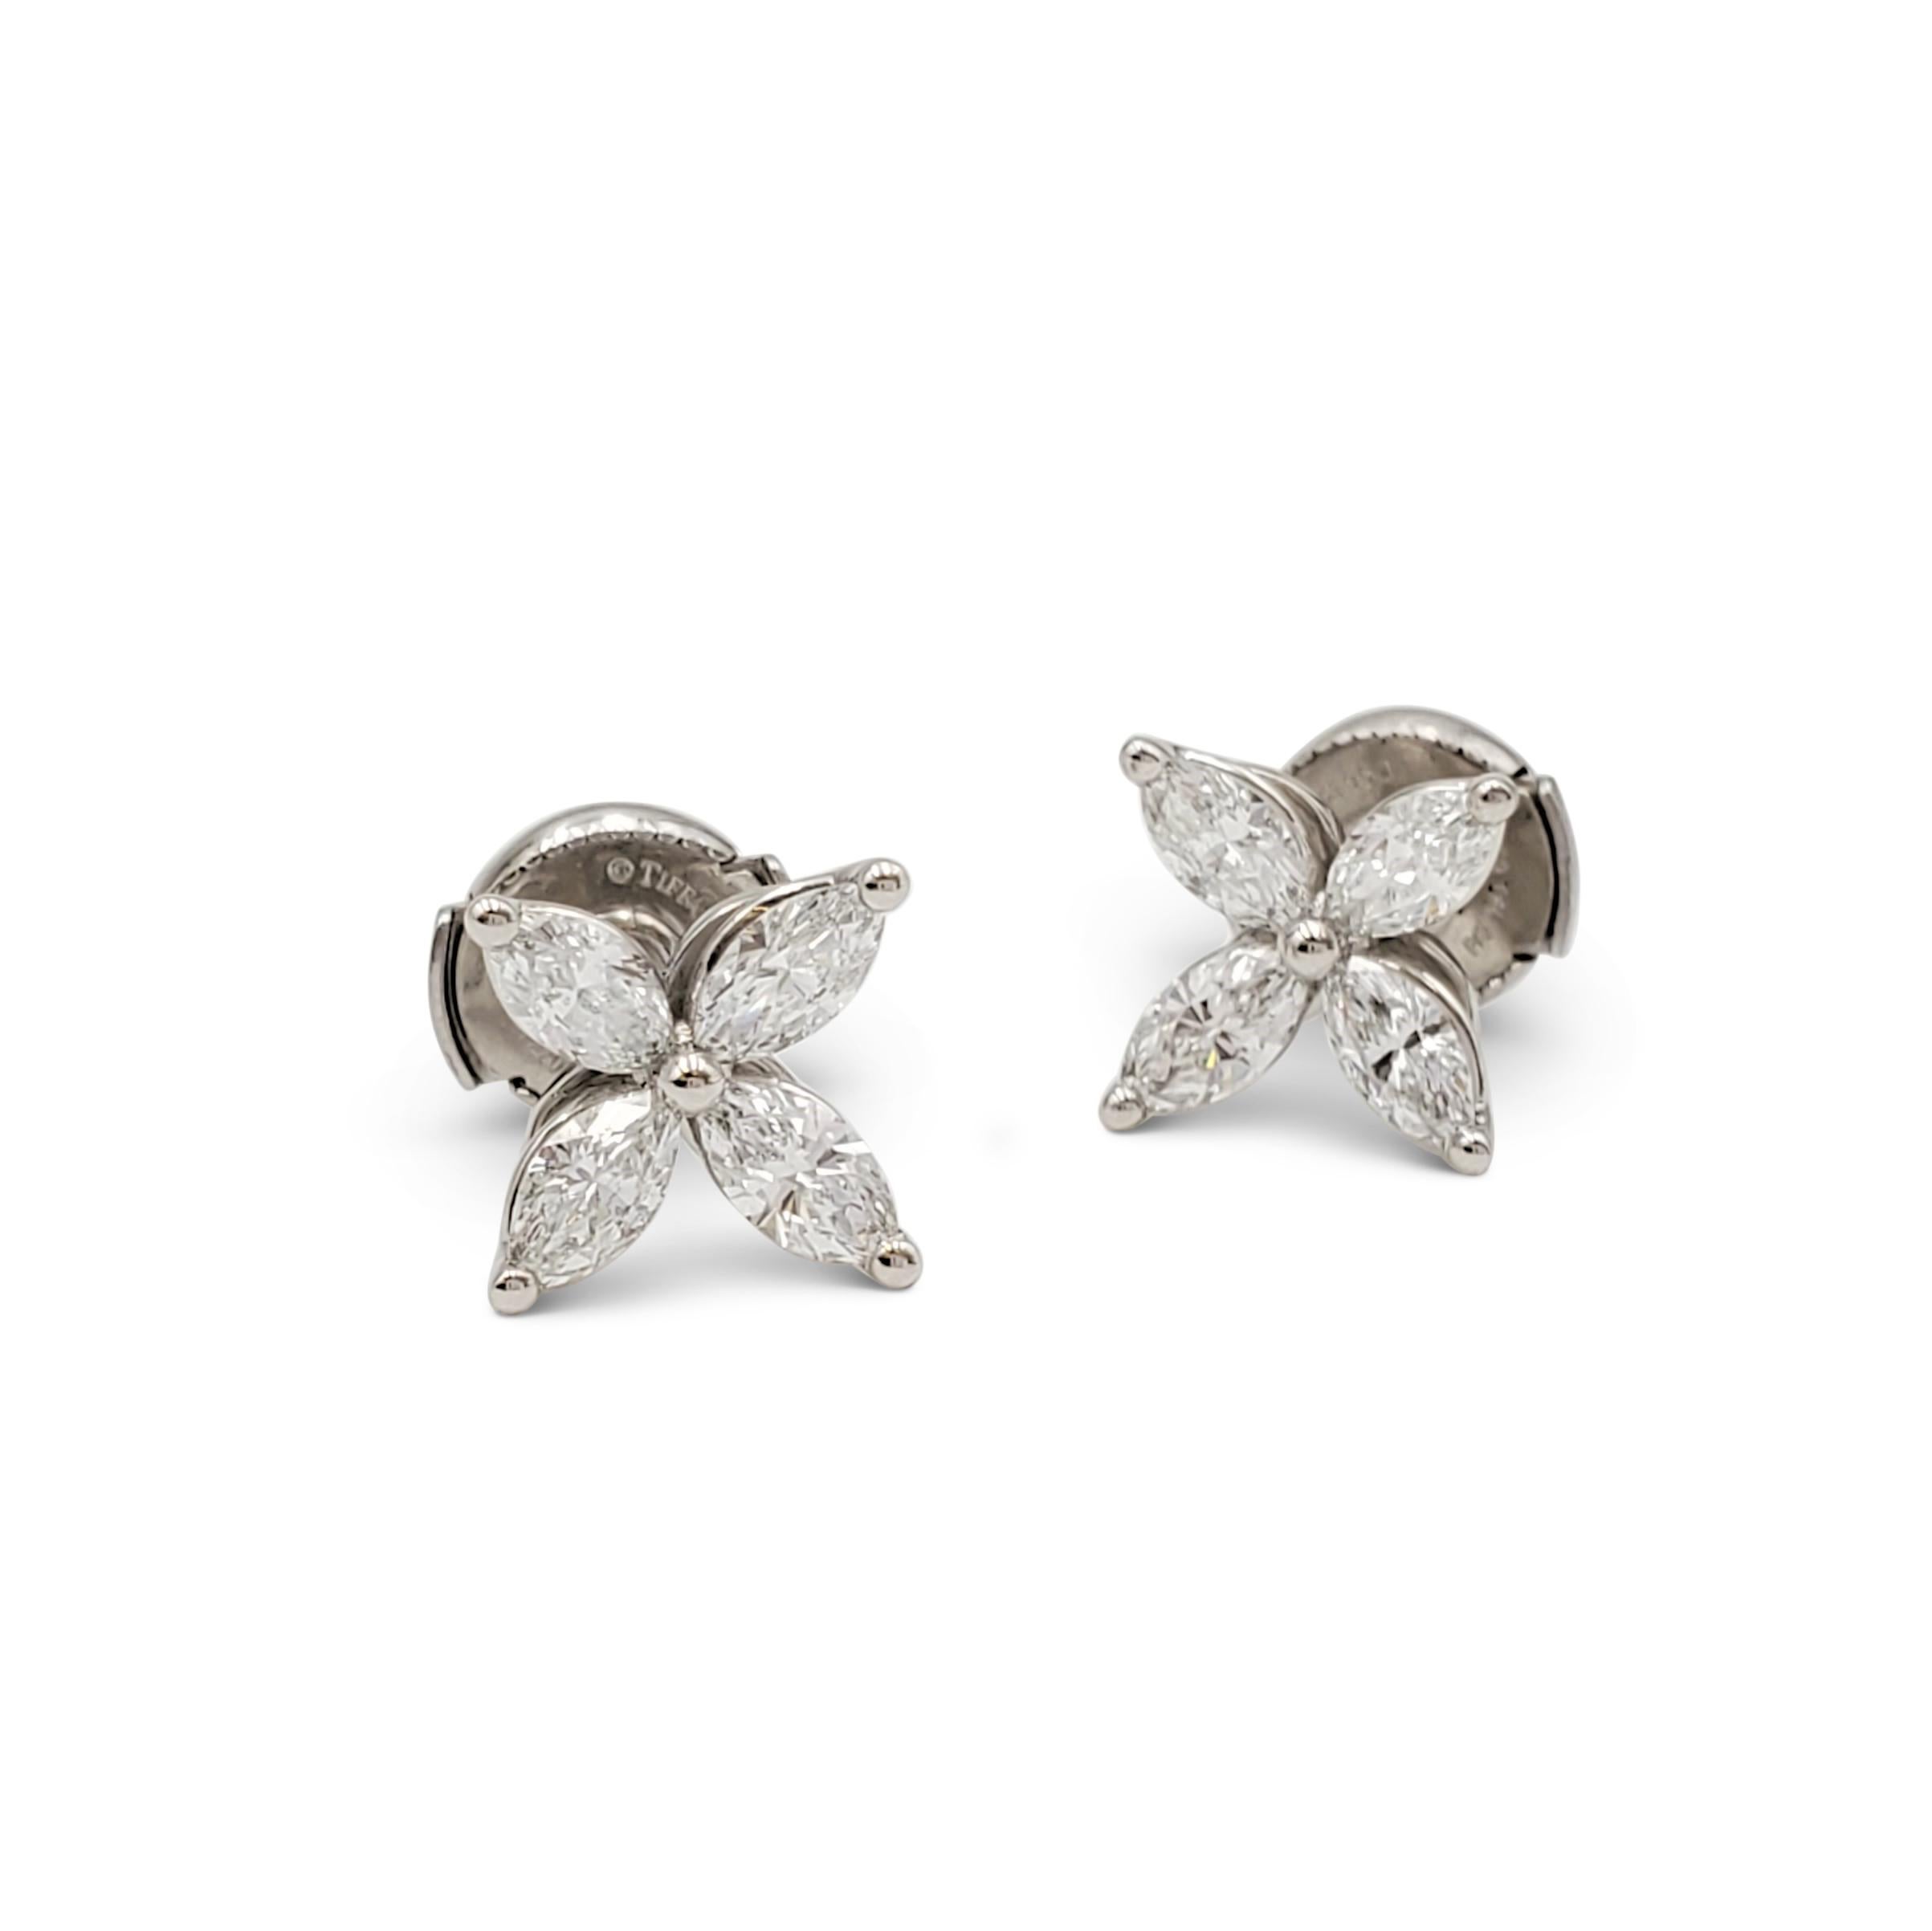 Authentic Tiffany & Co. 'Victoria' earrings crafted in platinum and set with sparkling marquise-shaped diamonds (E-F color, VS clarity) weighing an estimated 0.92 carats total weight. Signed Tiffany & Co., PT 950. The earrings are presented with the